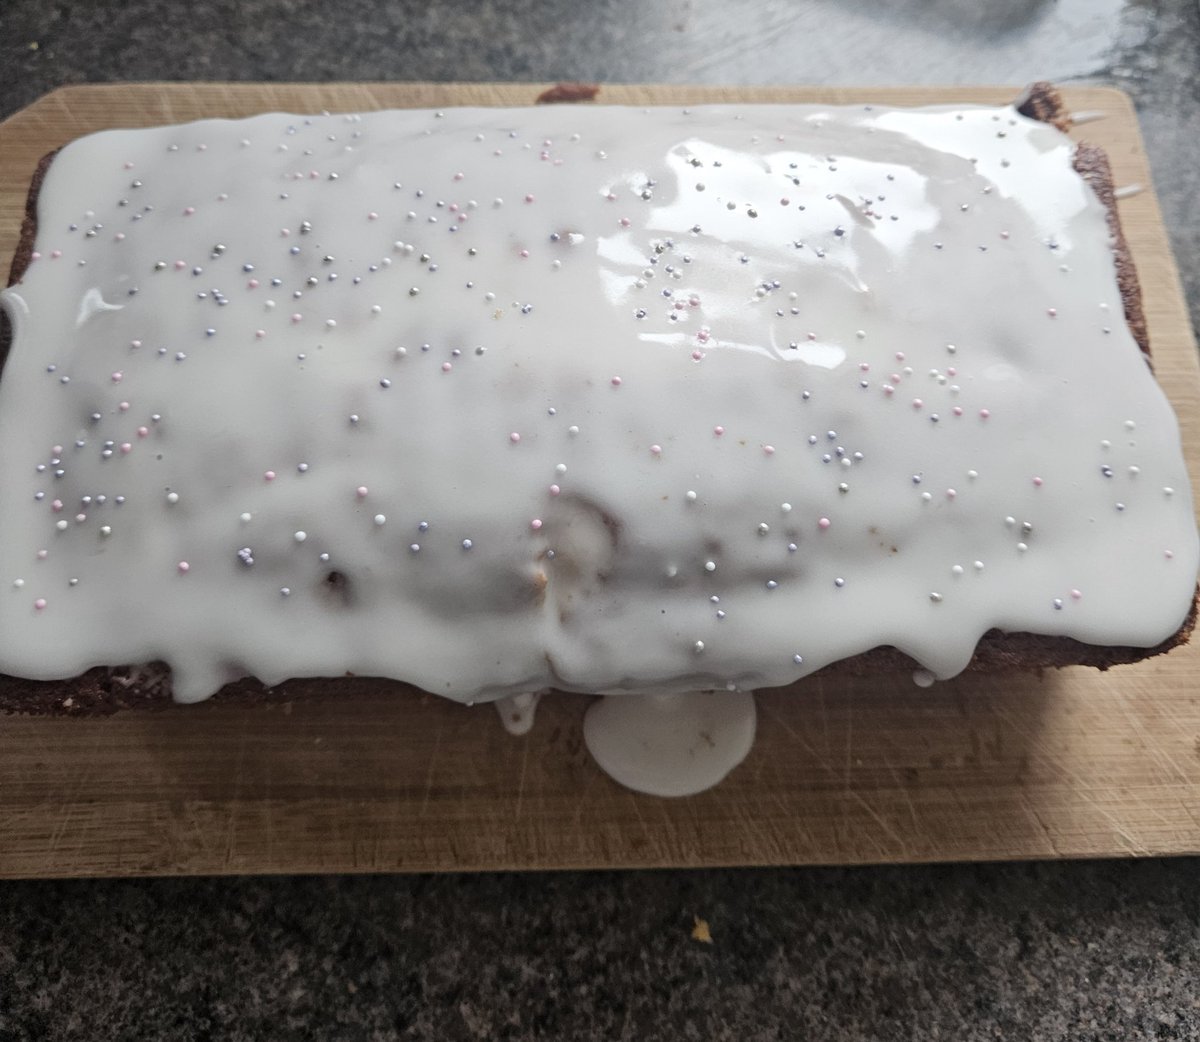 @ilovemypets56 I did this one yesterday (uncut traybake) today's was lemon drizzle!